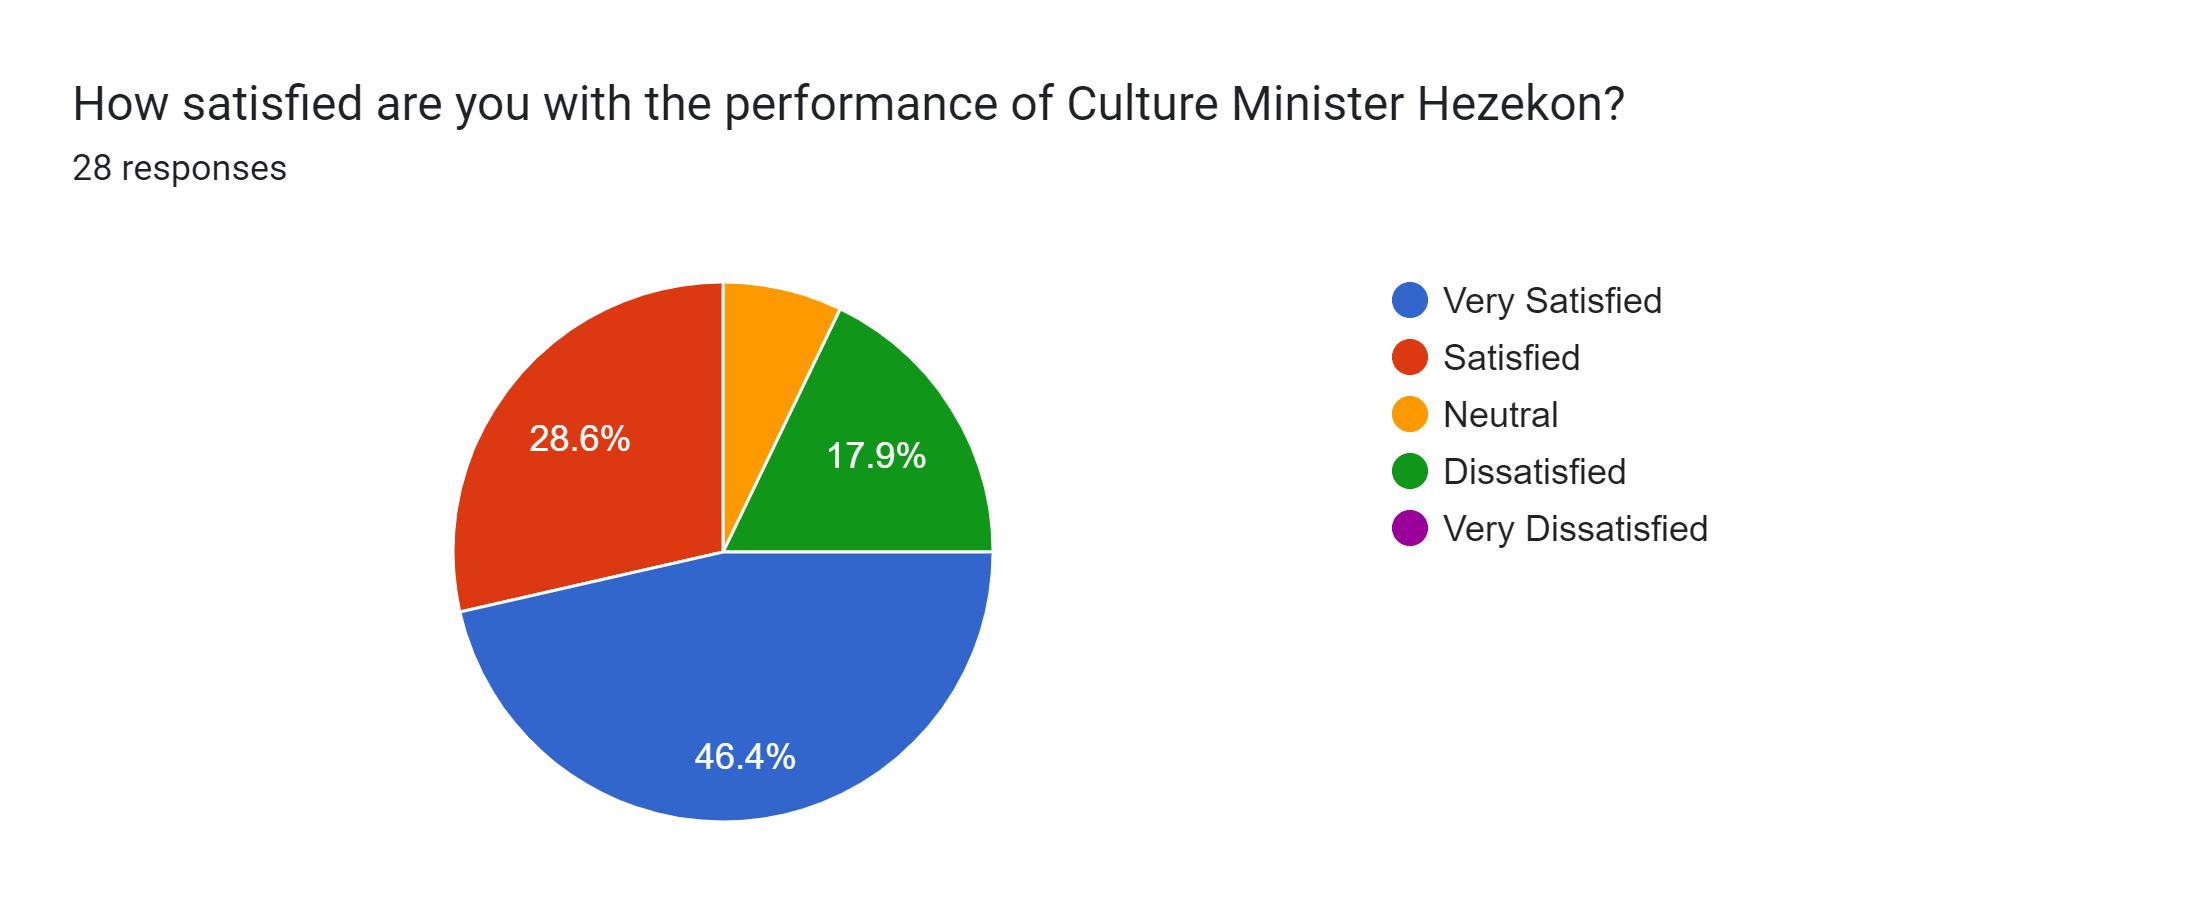 Forms response chart. Question title: How satisfied are you with the performance of Culture Minister Hezekon?. Number of responses: 28 responses.